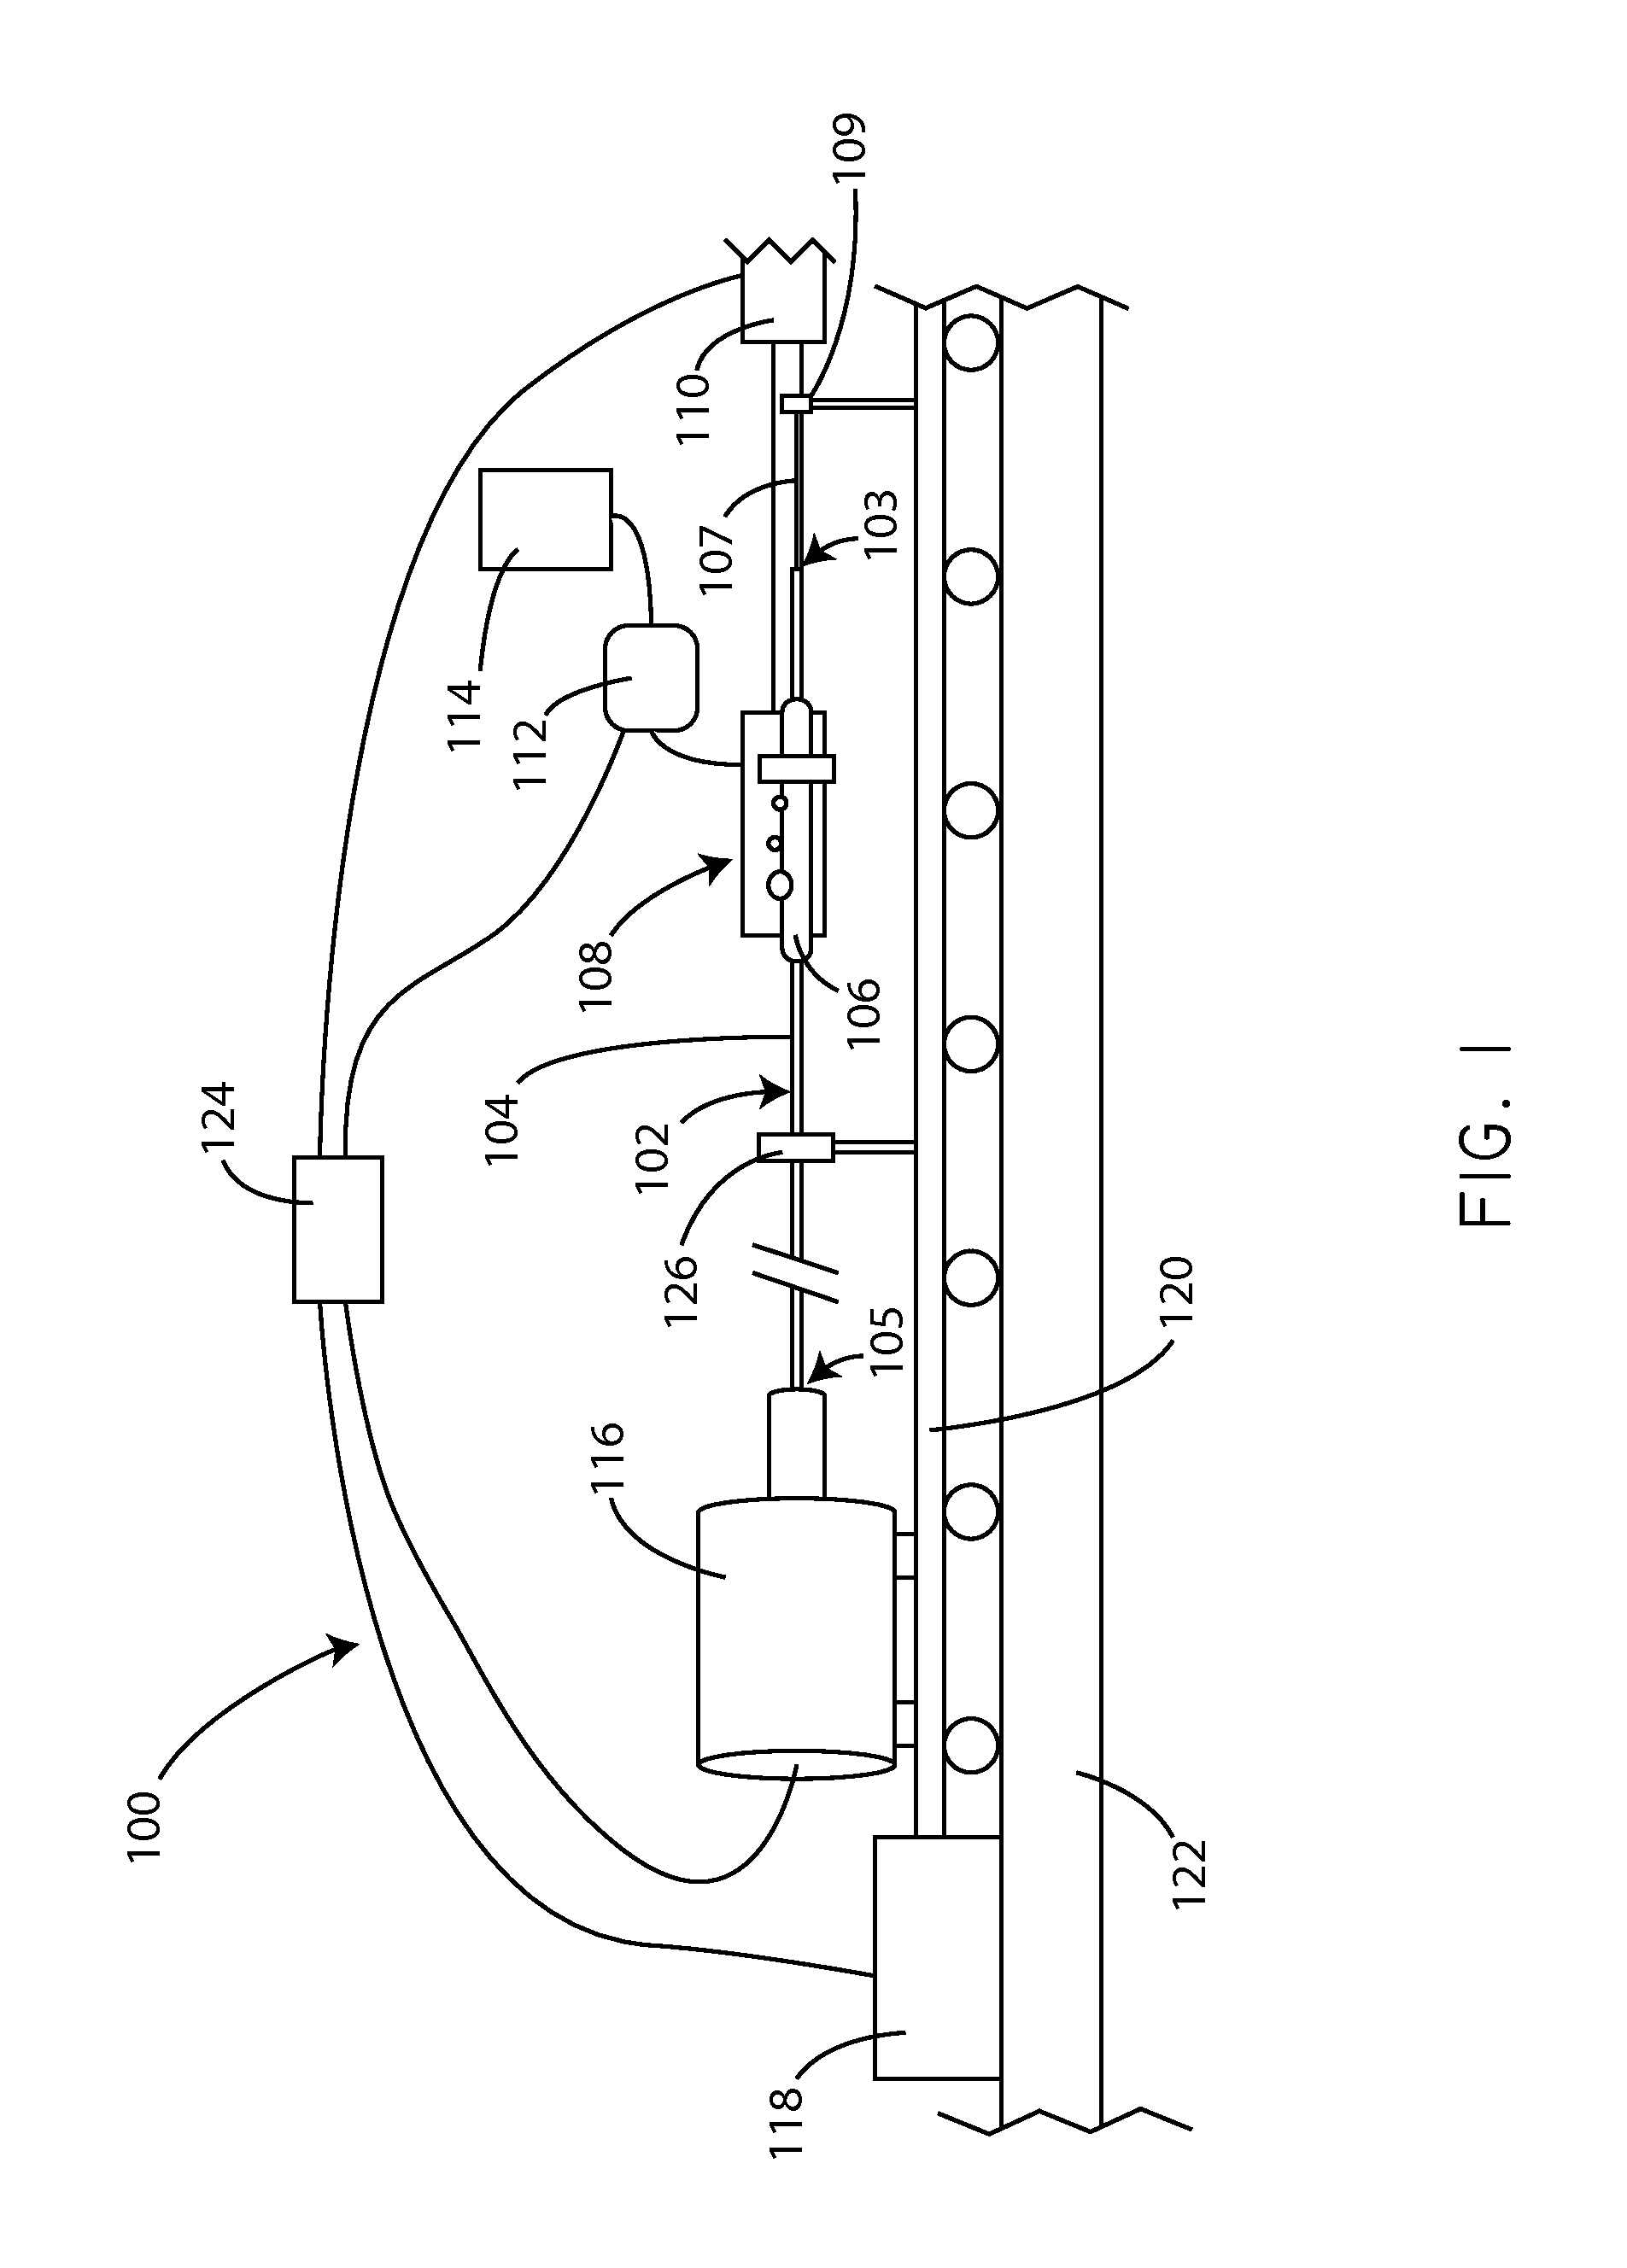 Apparatus and methods for coating medical devices